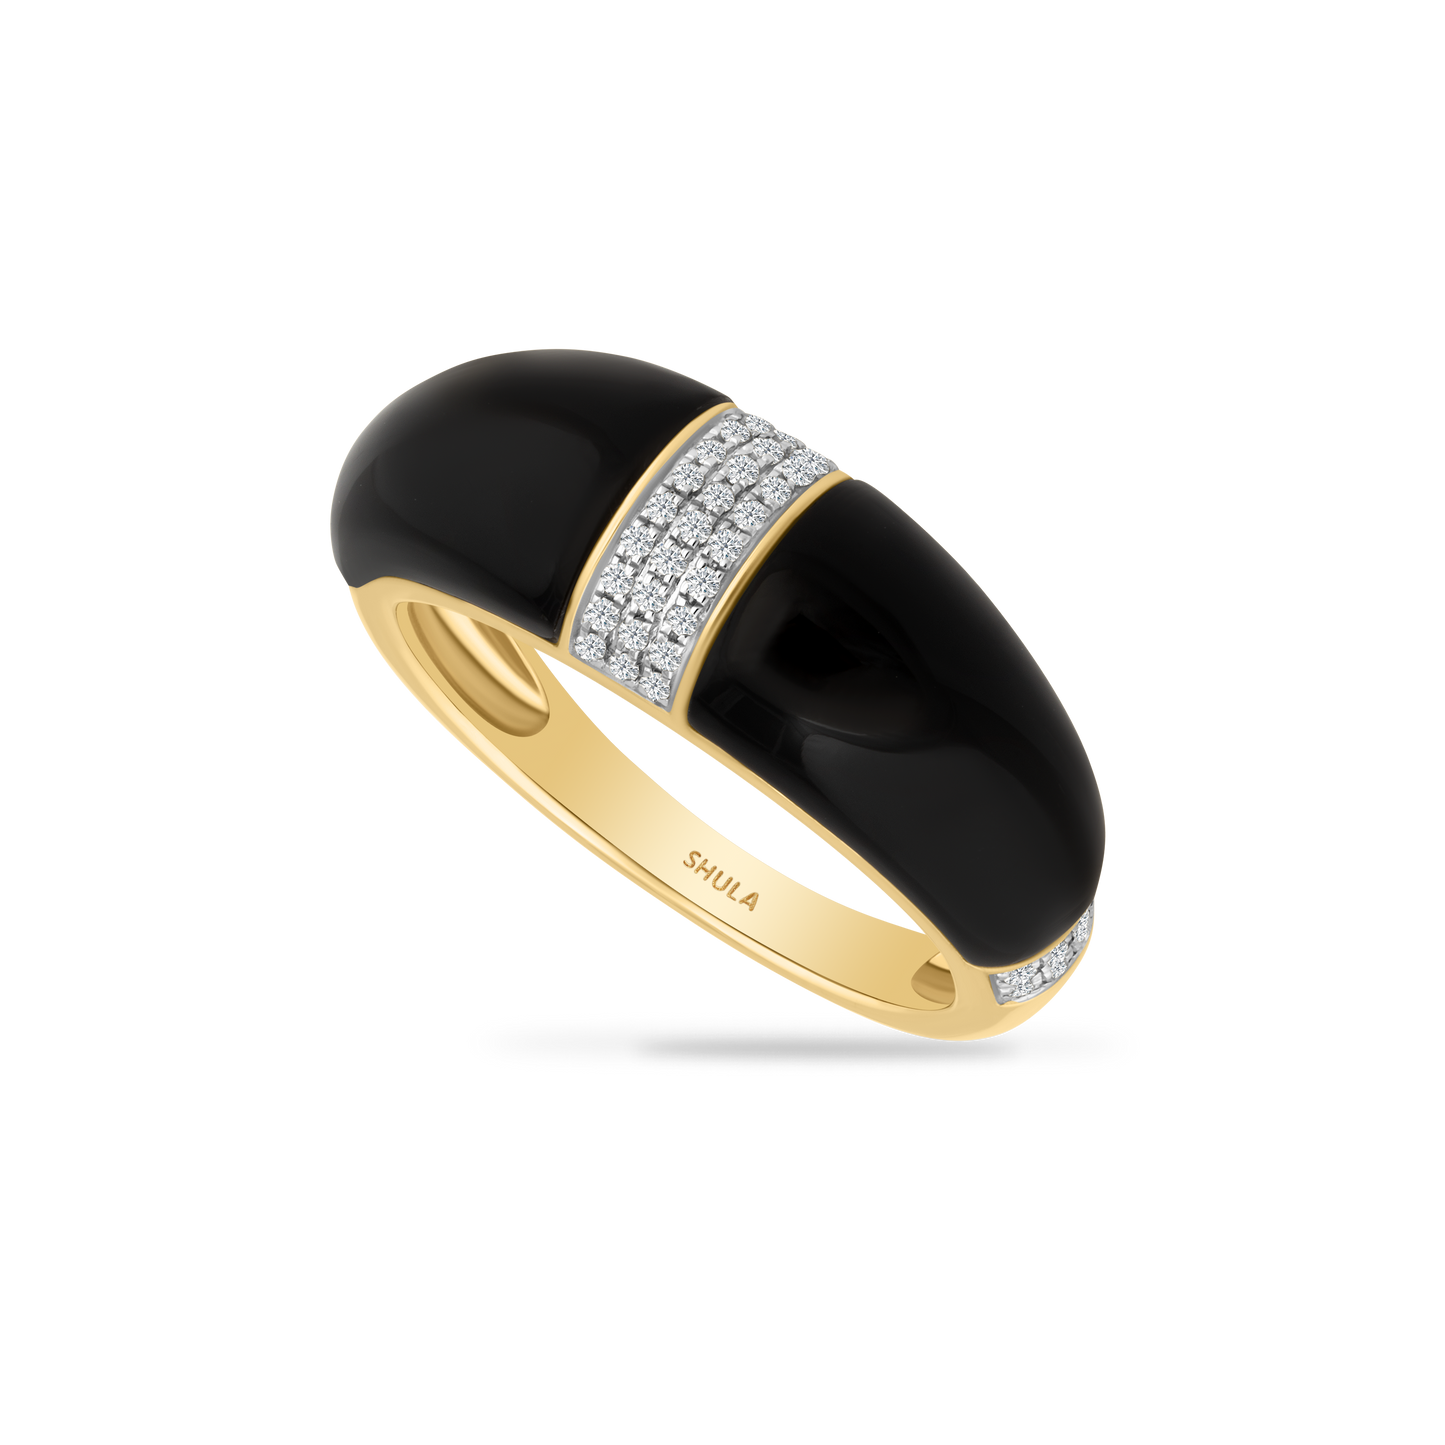 14K RING WITH 46 DIAMONDS 0.160CT AND 2 BLACK ONYX